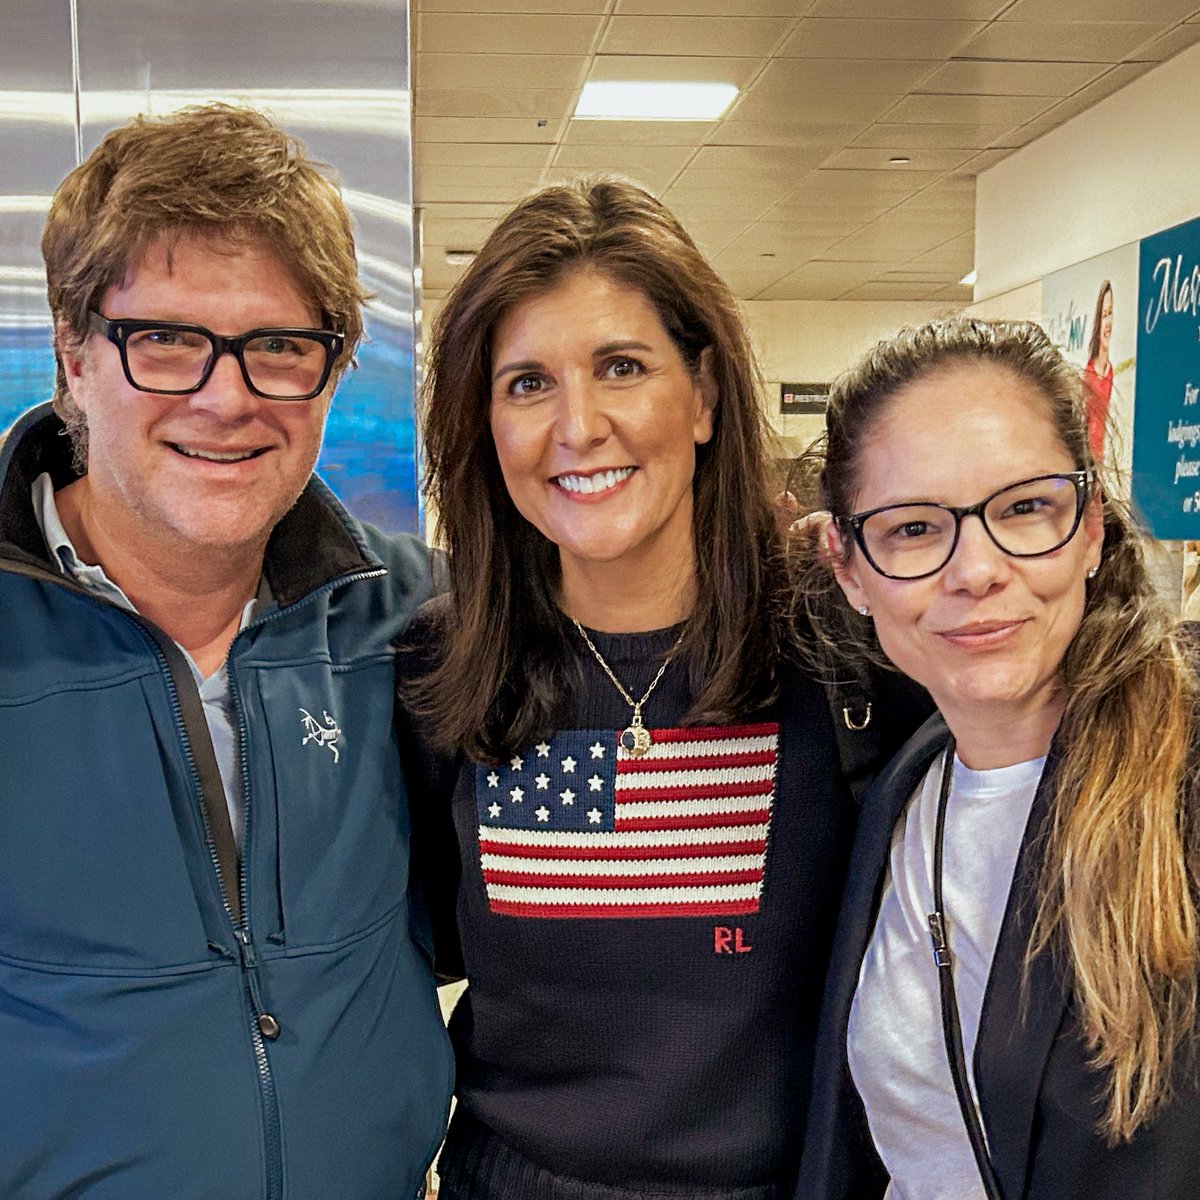 Nikki Haley @NikkiHaley such a pleasure to connect with you in Boston. I admired you ever since you stood up for Israel at the United Nations. I am wishing you much success in your Presidential bid and am proud you call myself as one of your supporters. #NikkiHaley